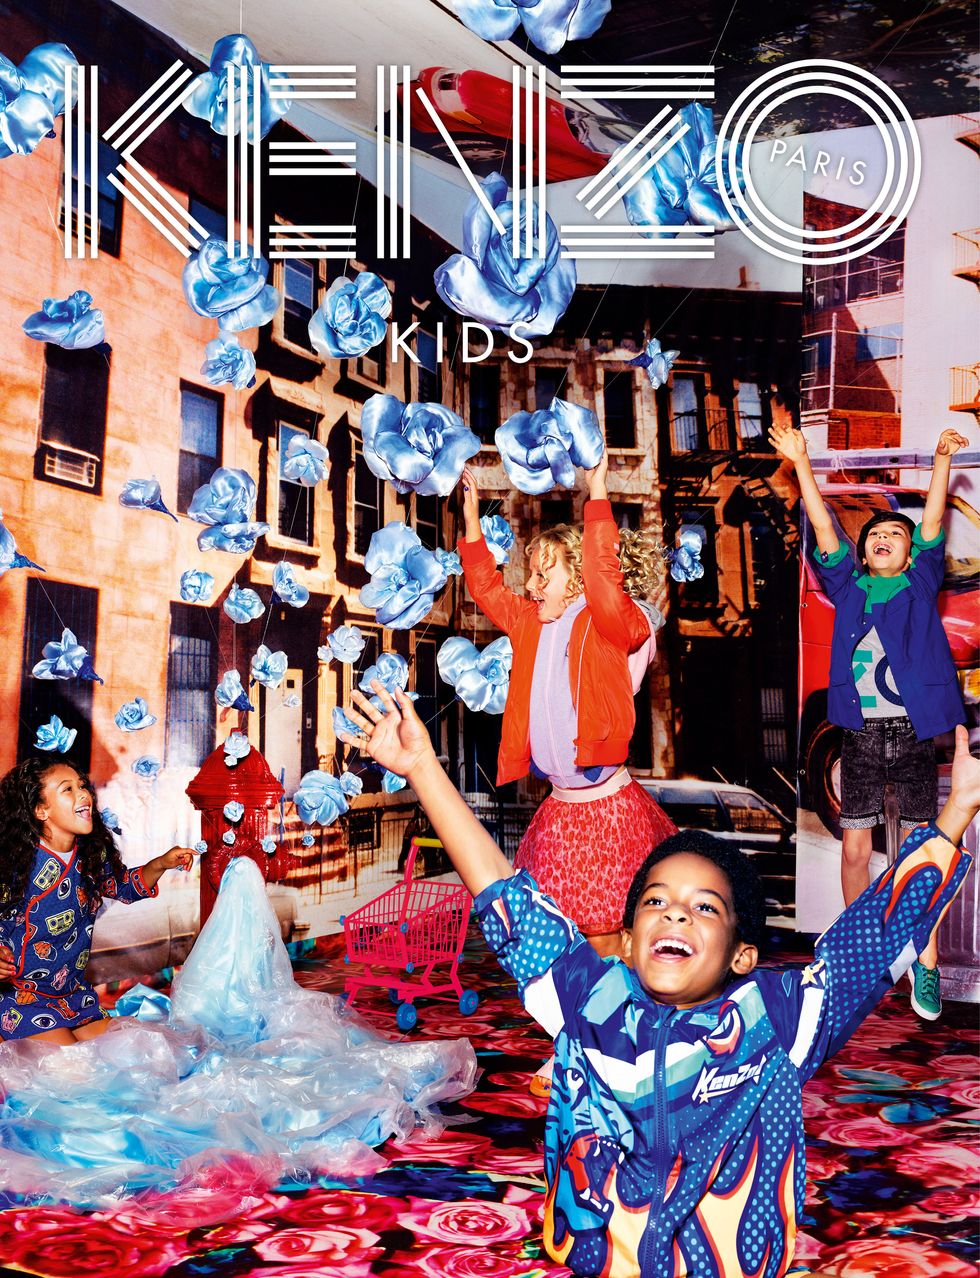 Dave LaChapelle Shot KENZO’s Spring/Summer 2019 Campaign - PAPER Magazine